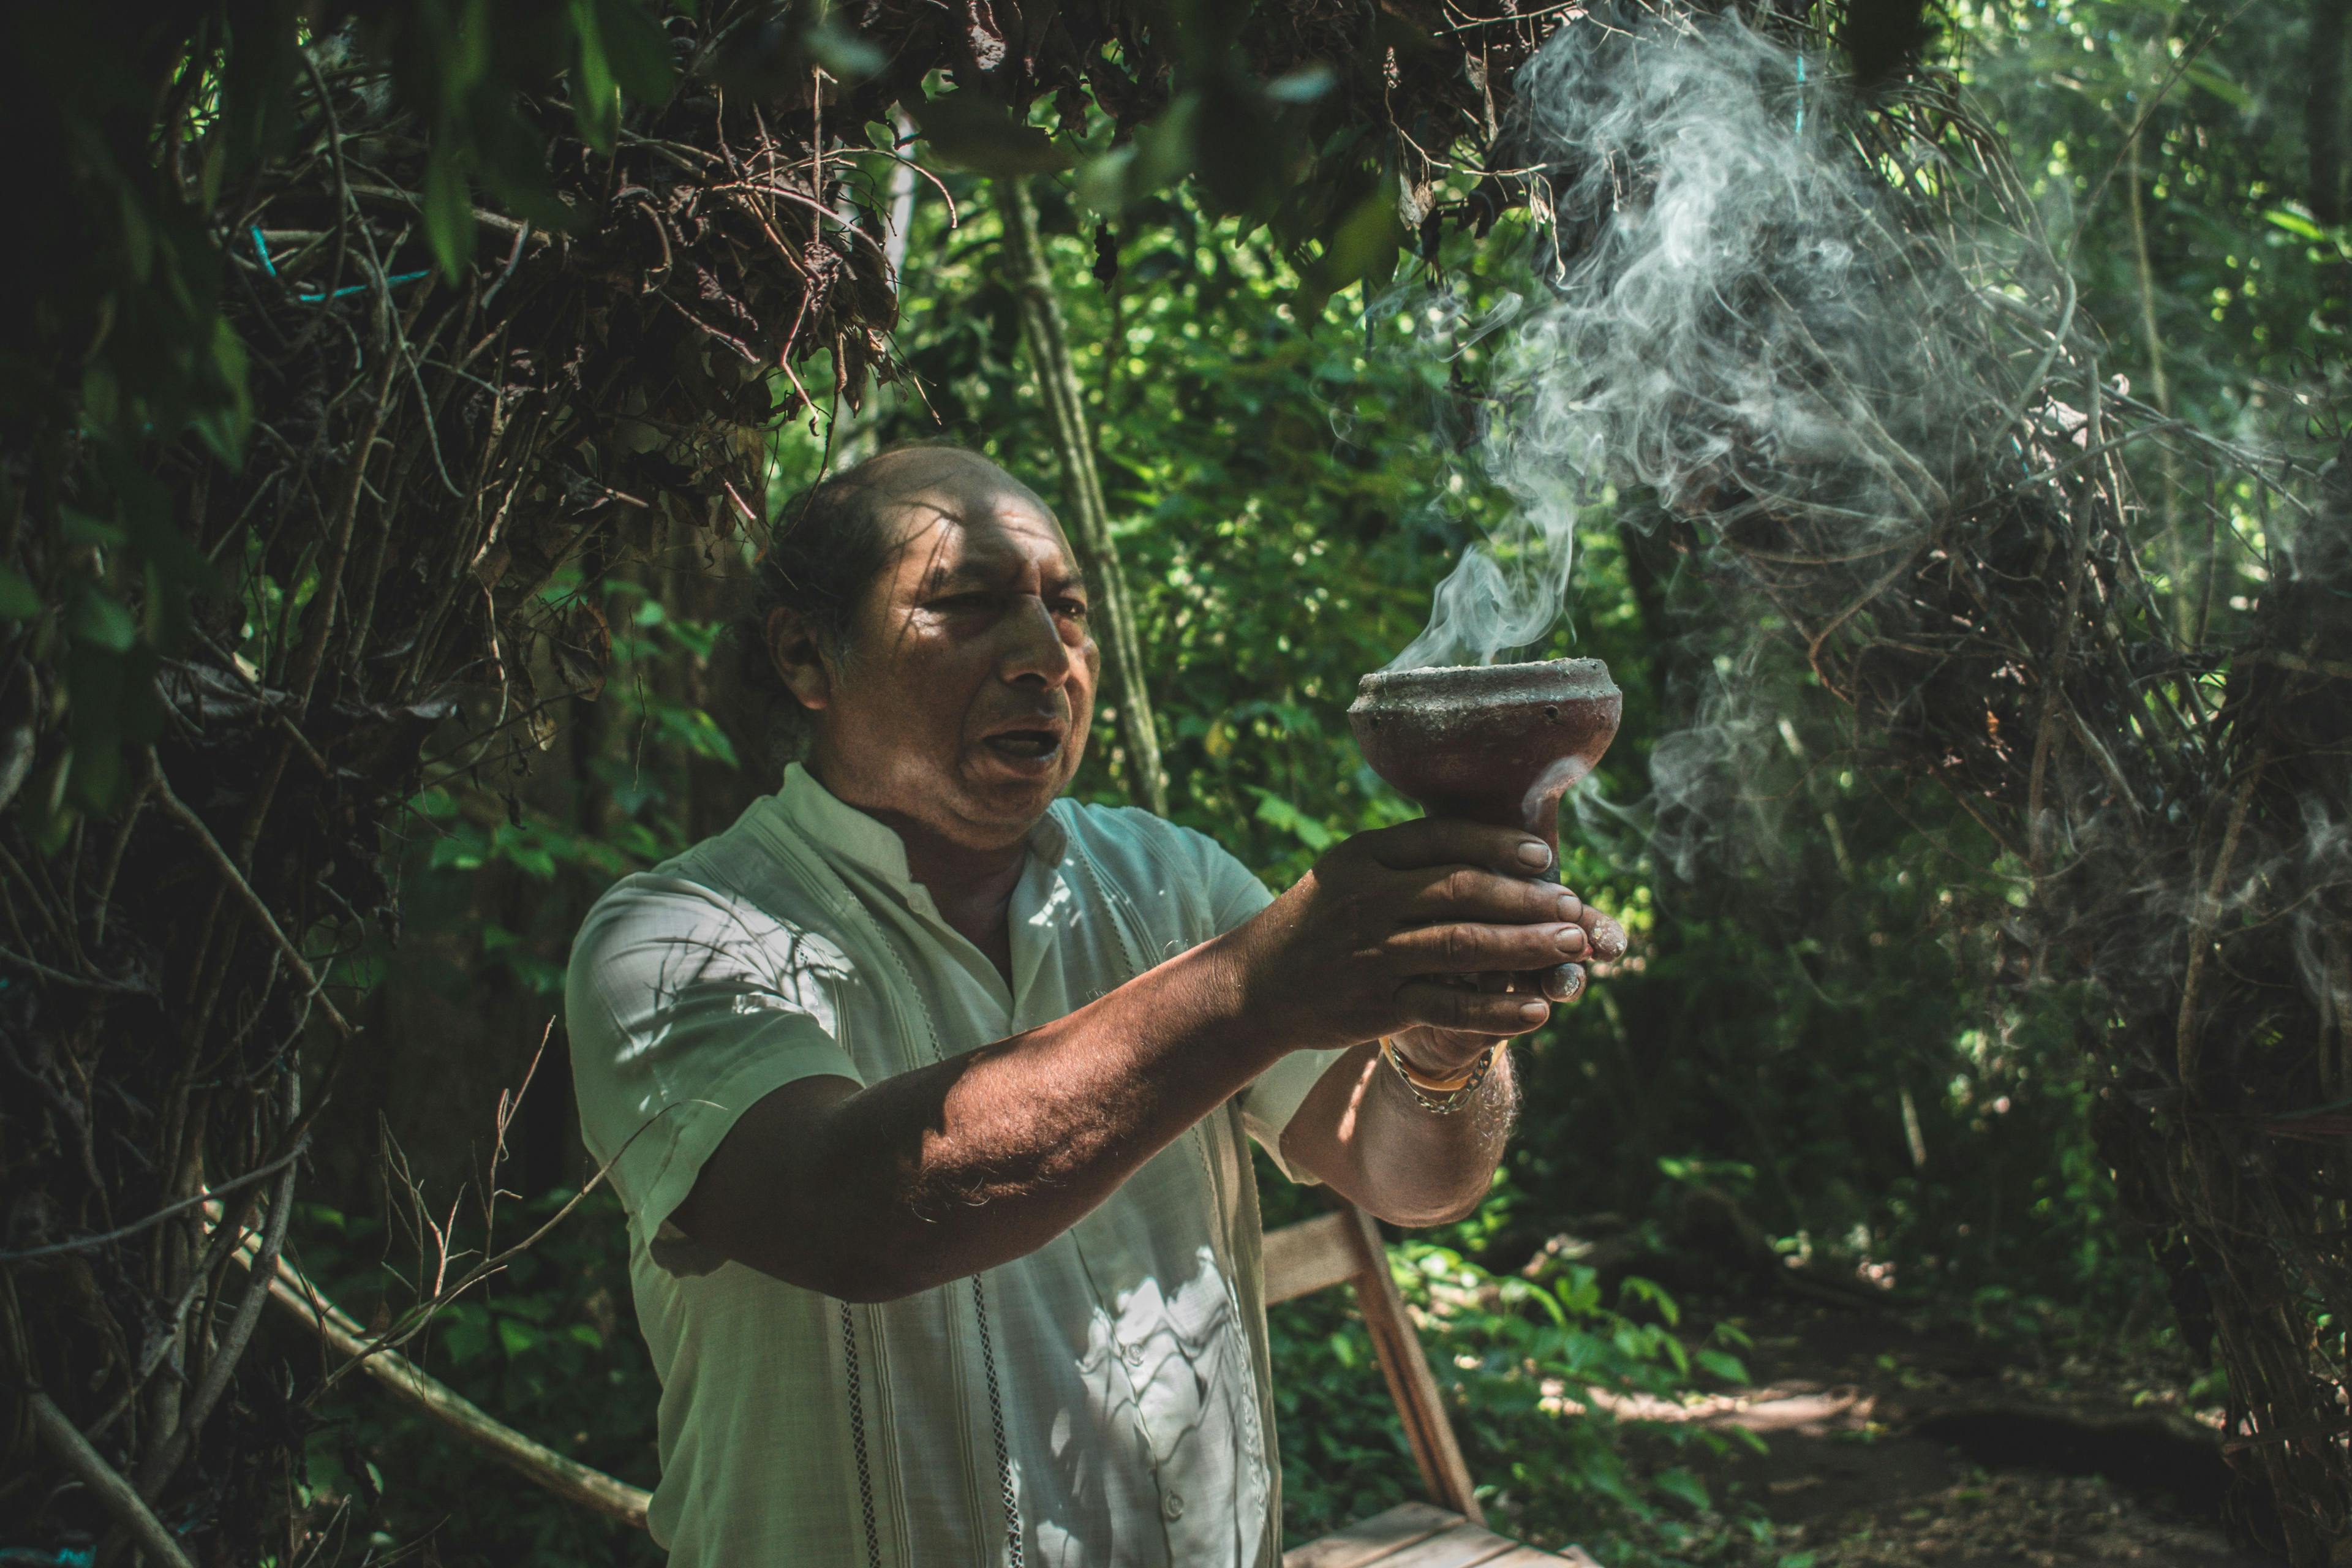 Man with a smoking pot during Mayan ceremony in Tulum